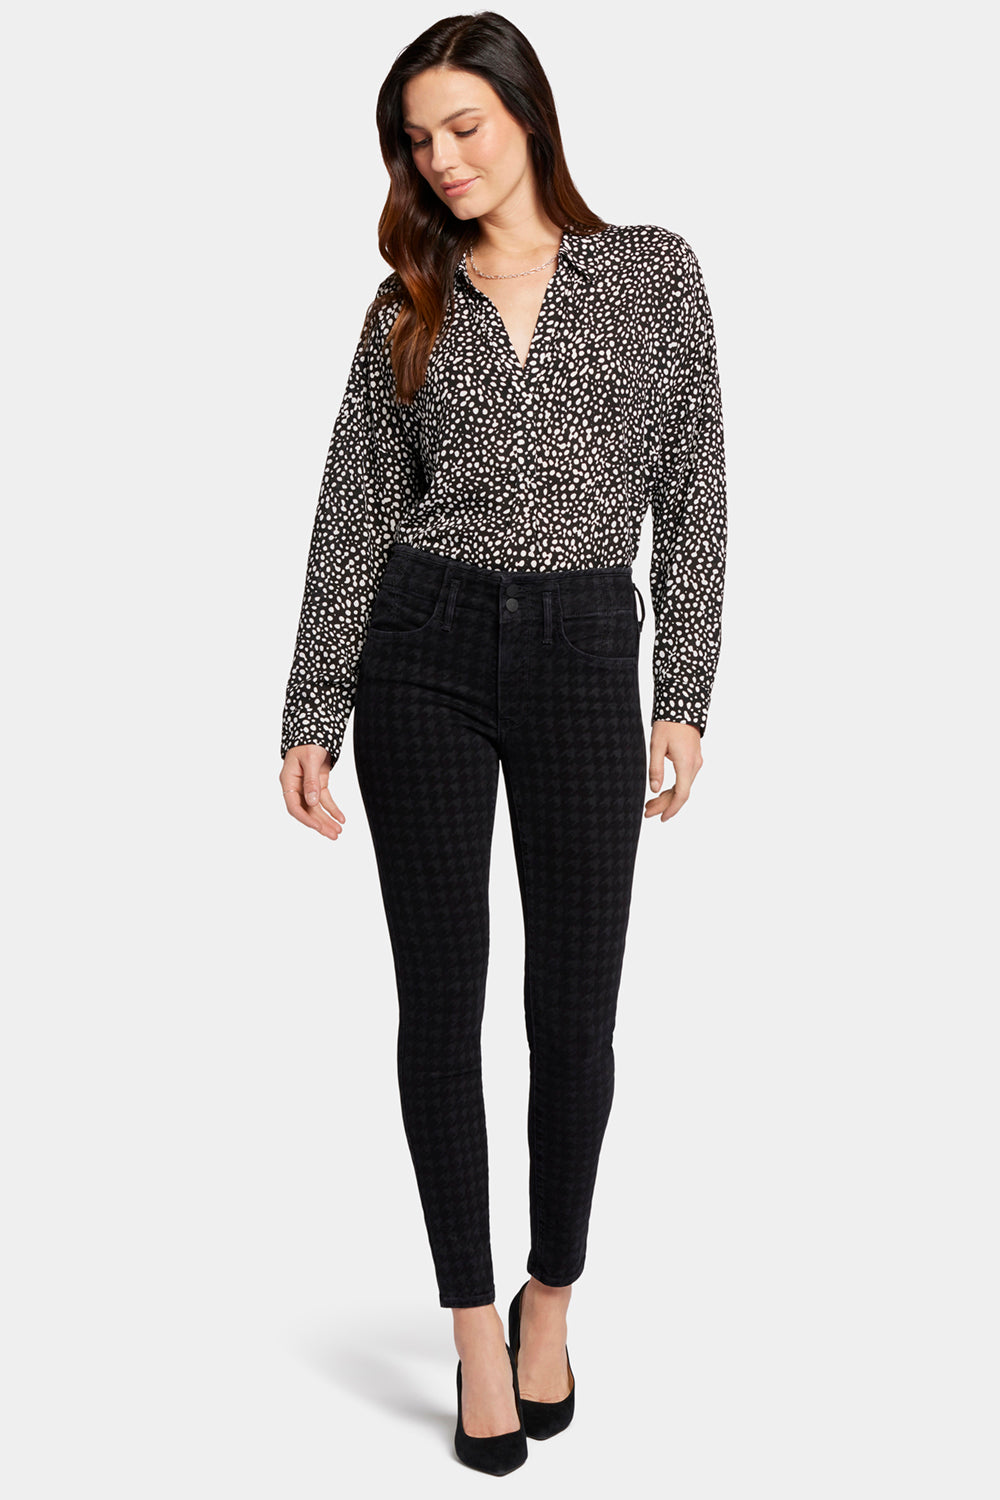 NYDJ Ami Skinny Jeans  - Houndstooth Luxe Burnout